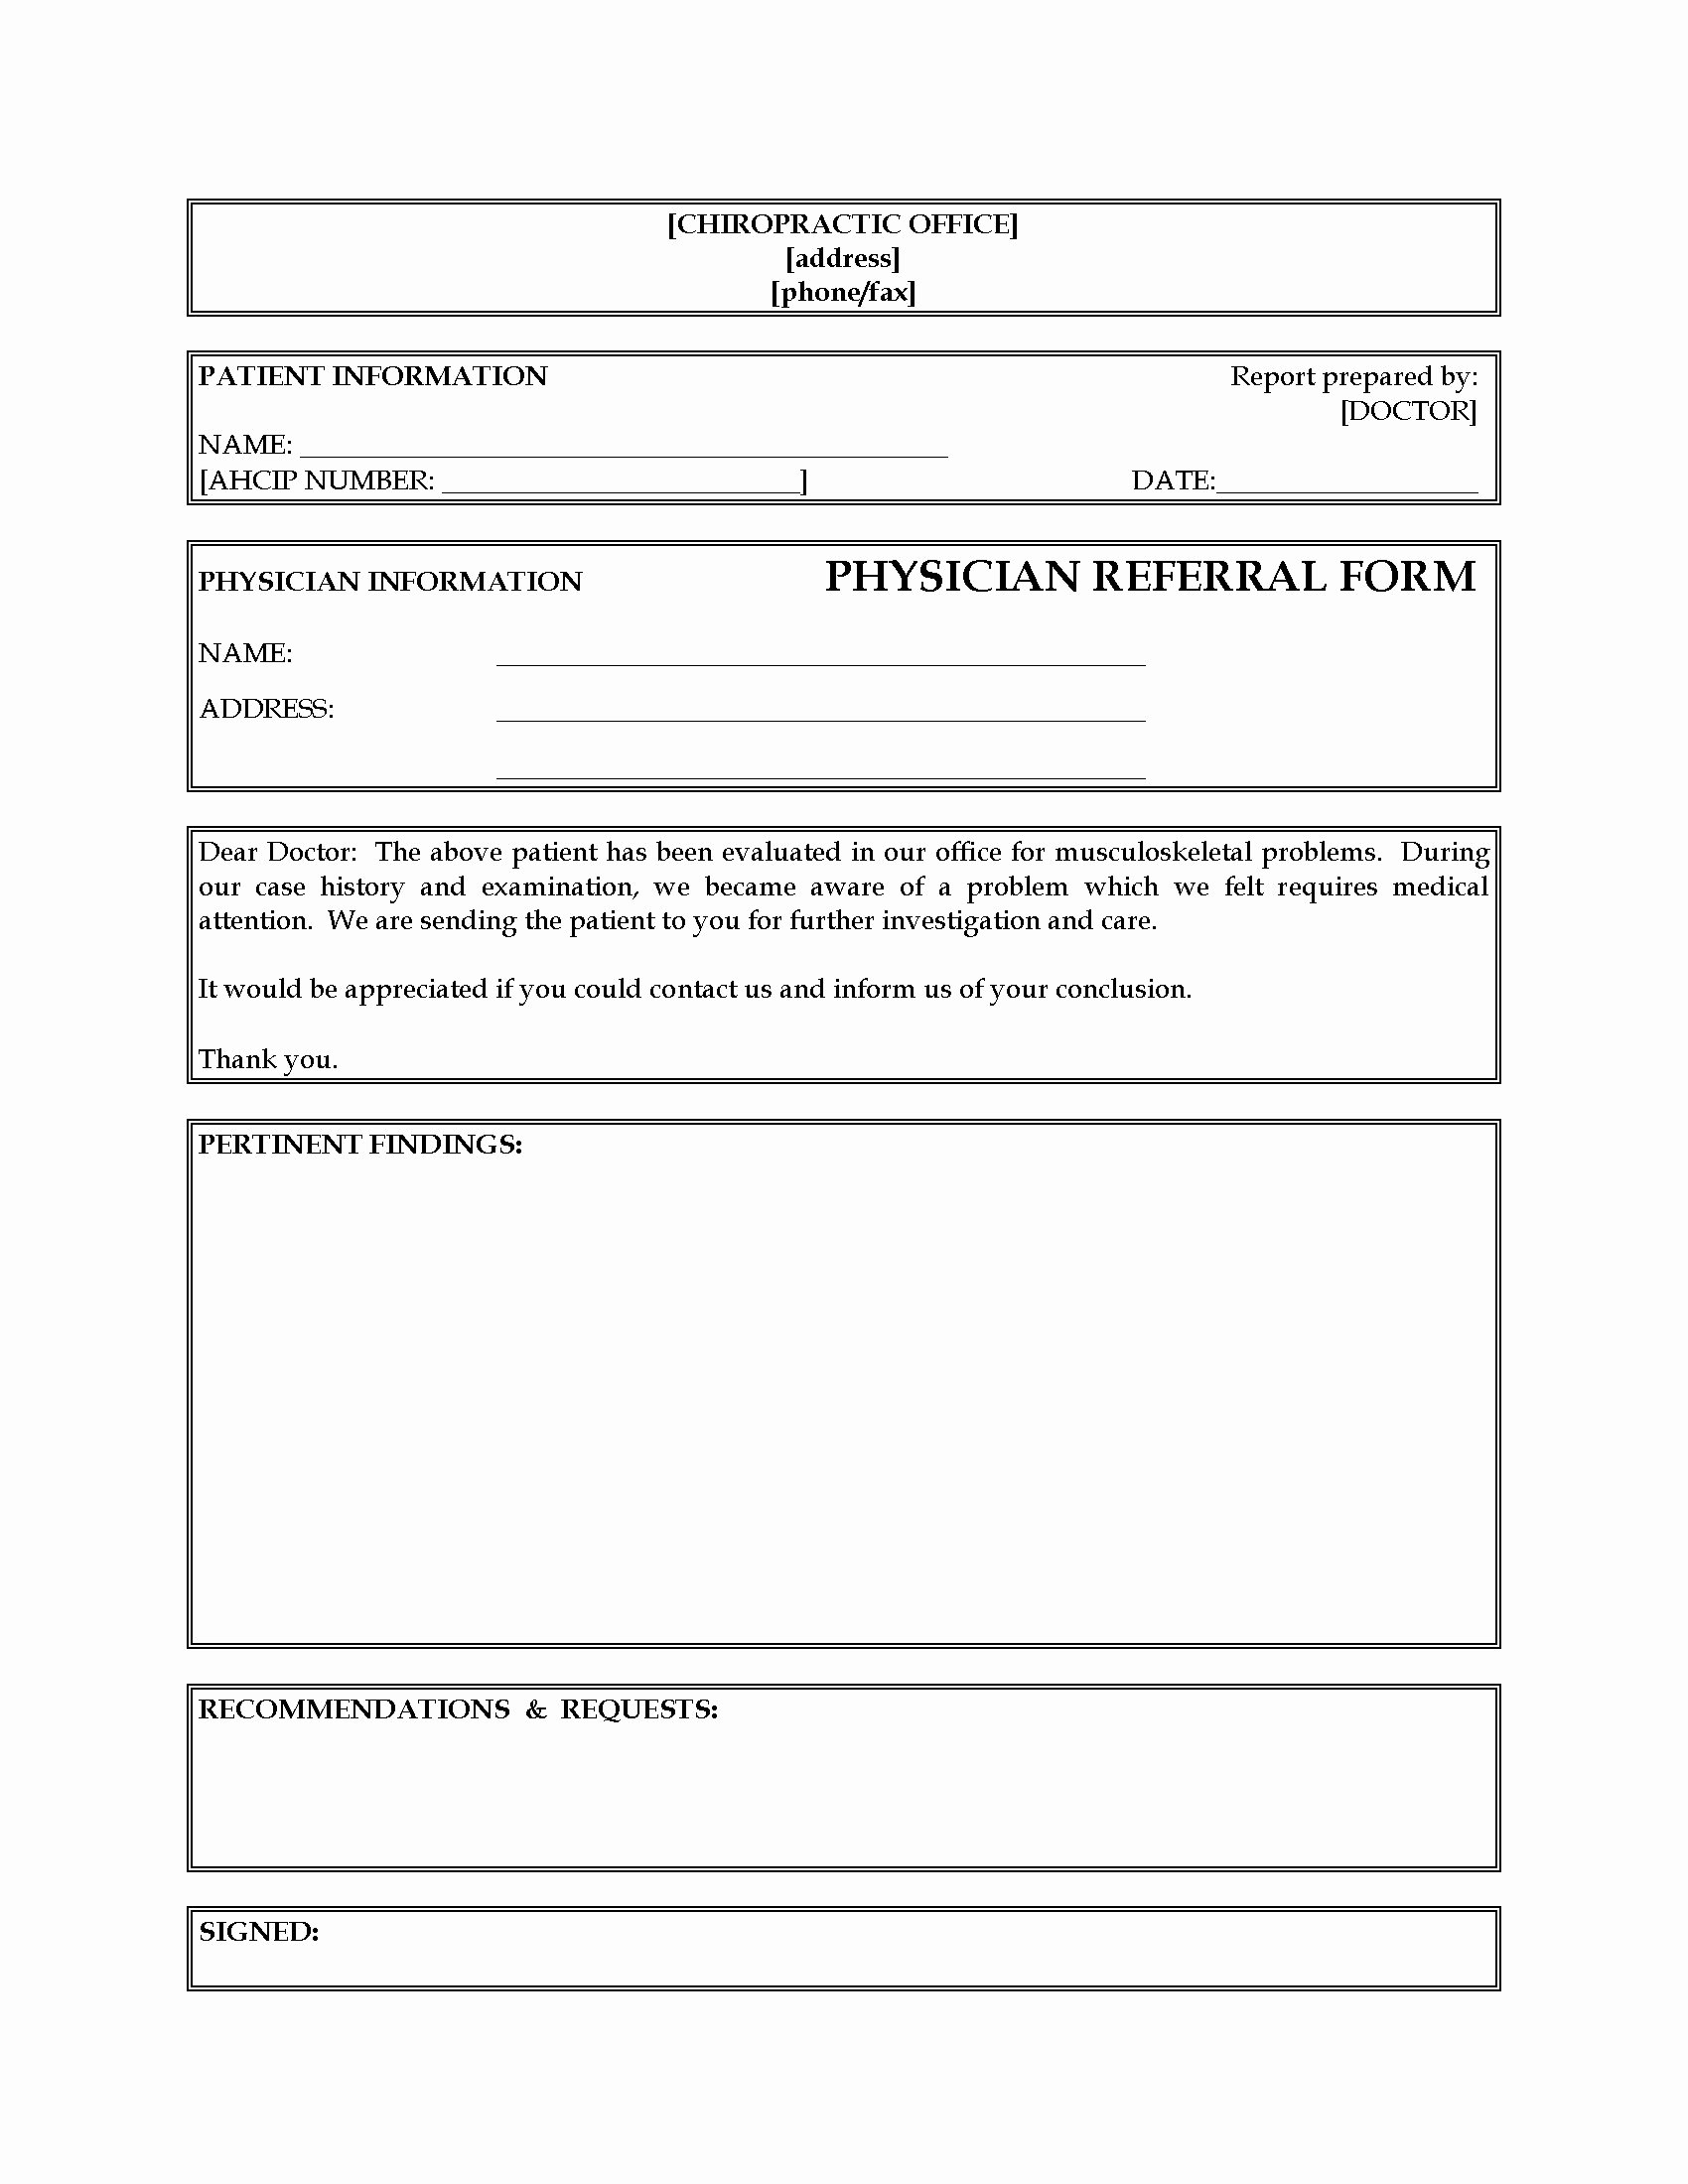 Medical Referral forms Template Beautiful Referral form From Chiropractor to Physician